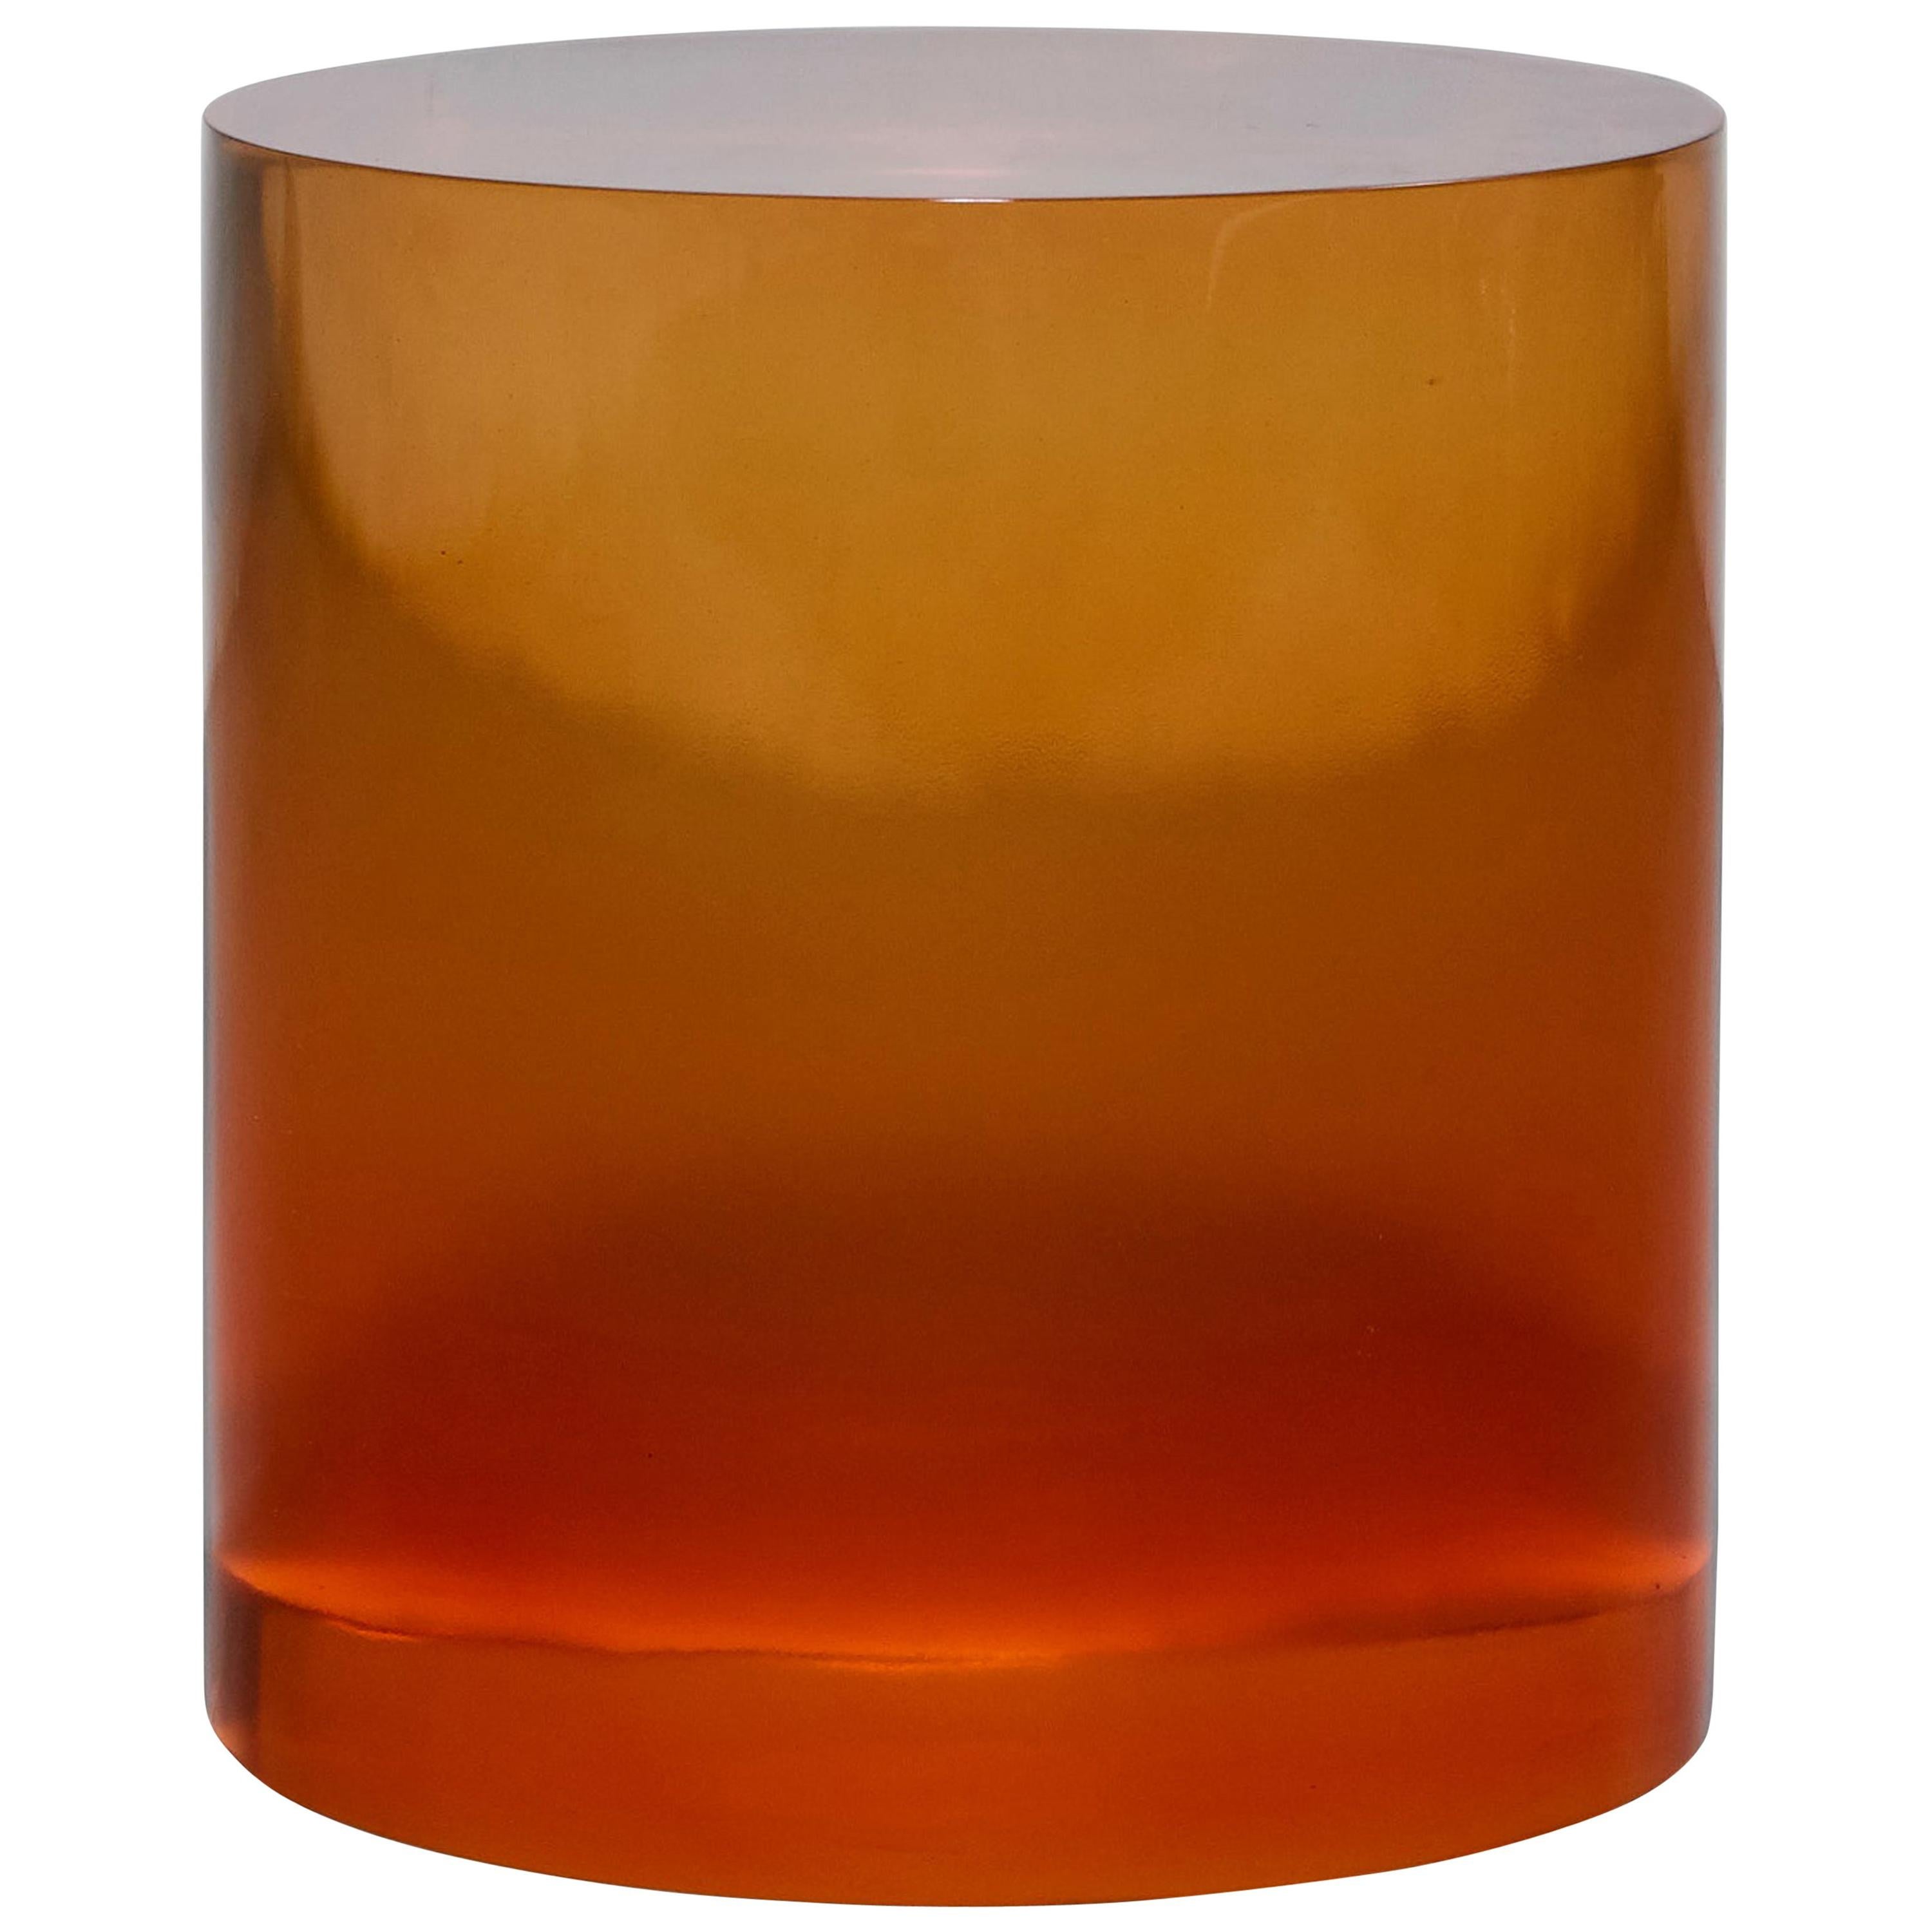 Seeing Through Your Illusions Sunset, Orange Translucent Resin Stool by Hua Wang